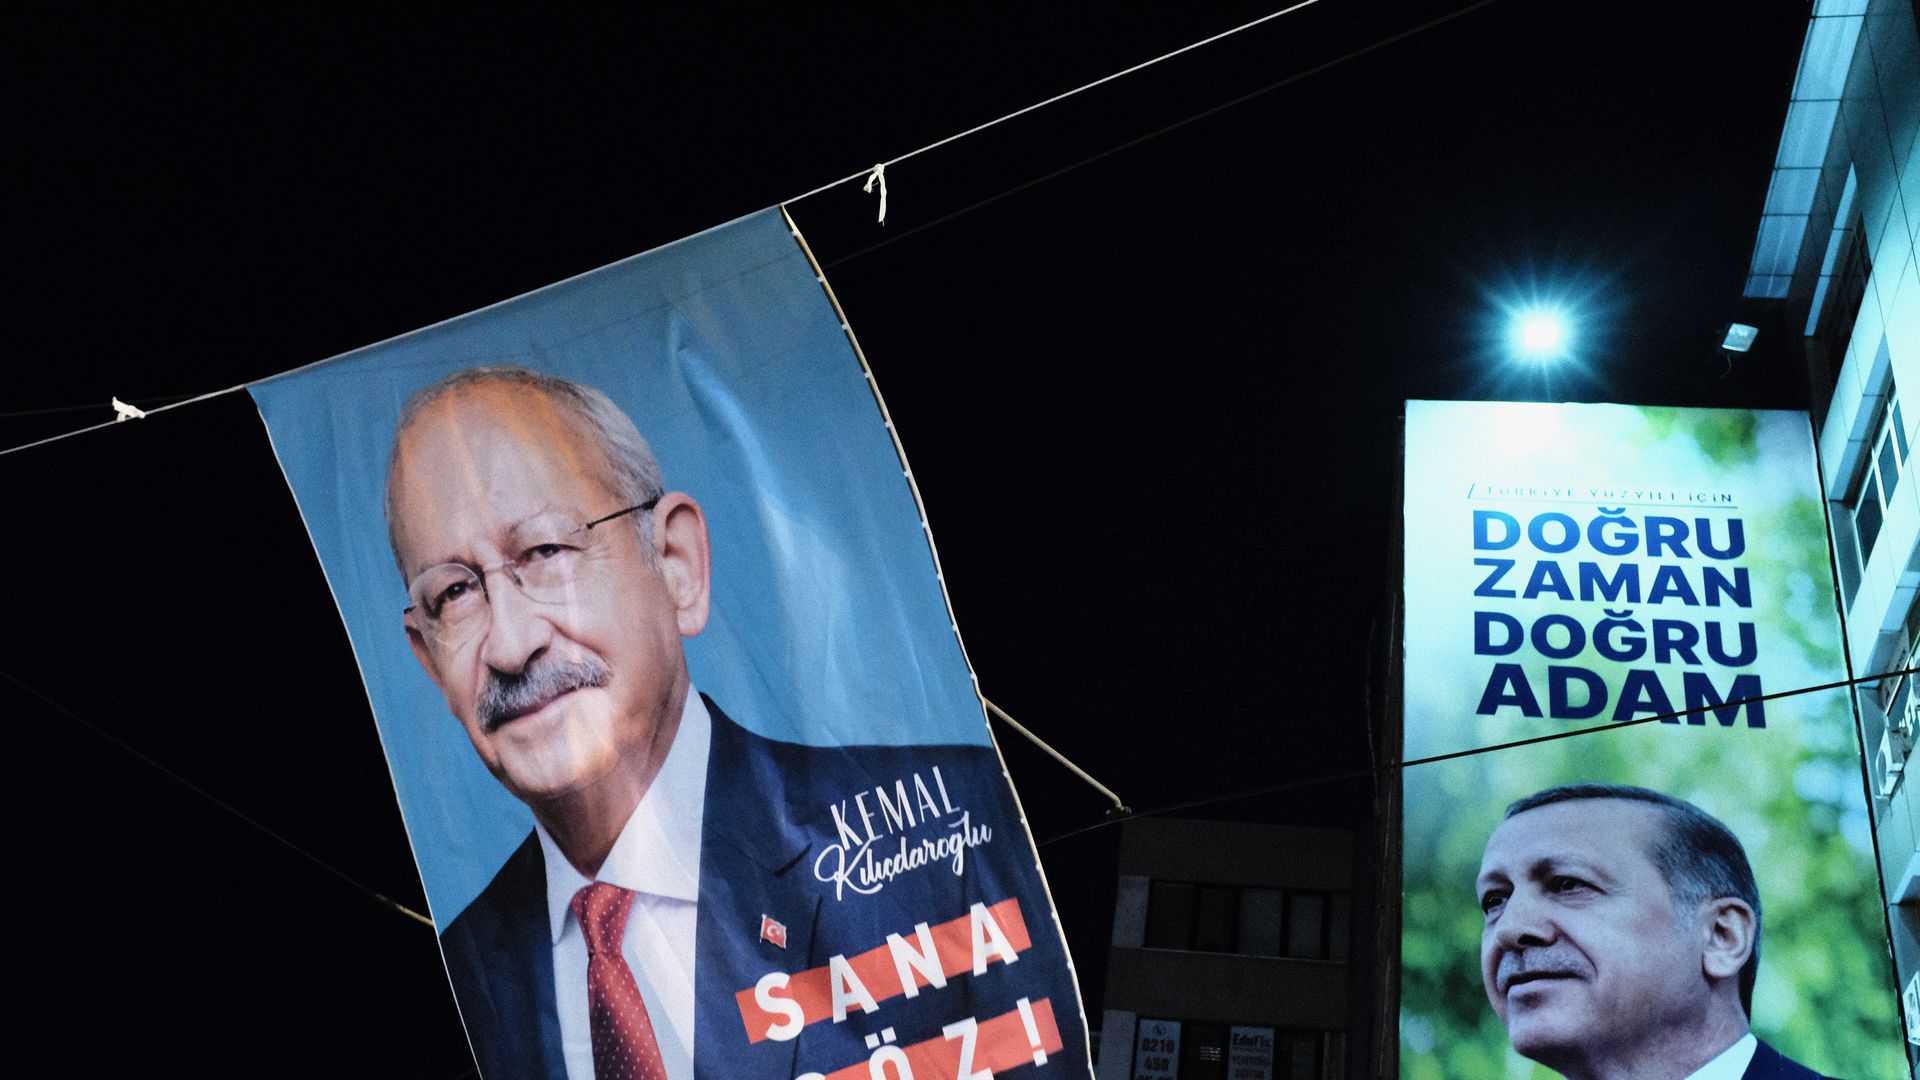 Campaign posters with photos of Turkey's presidential candidates, the leader of the opposition Republican People's Party (CHP) Kemal Kilicdaroglu and Turkish President Recep Tayyip Erdogan